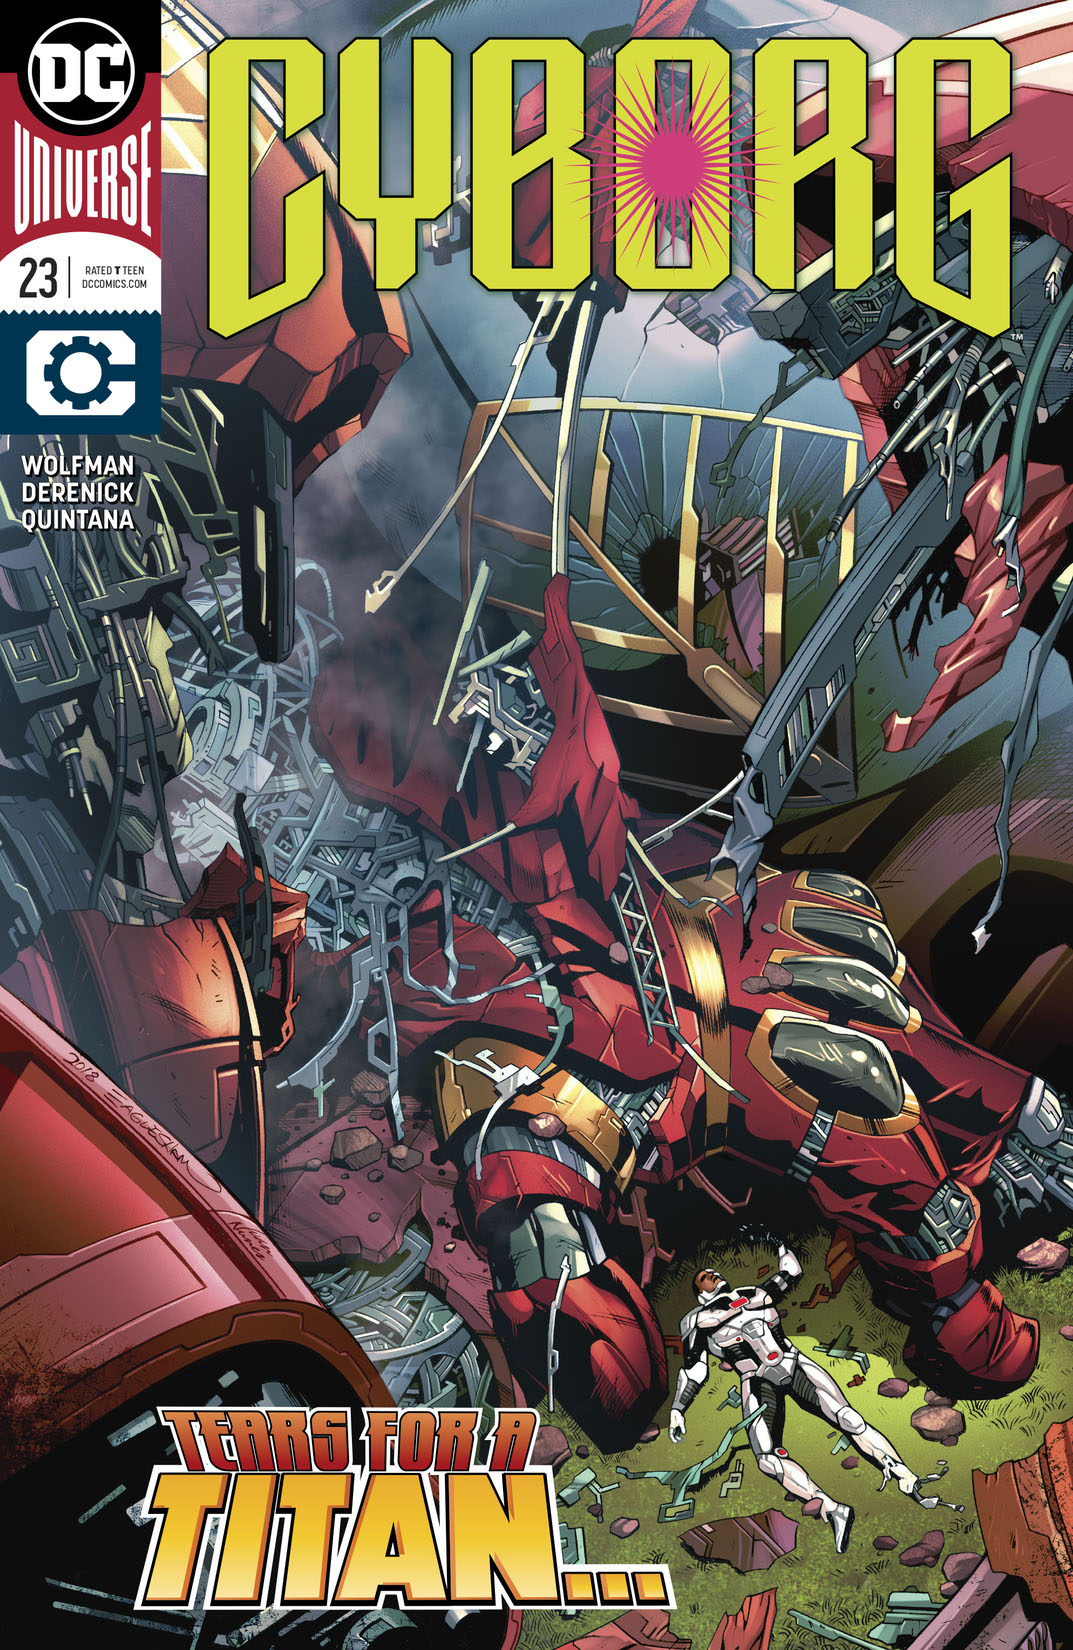 Cyborg (2016-) #23 preview images